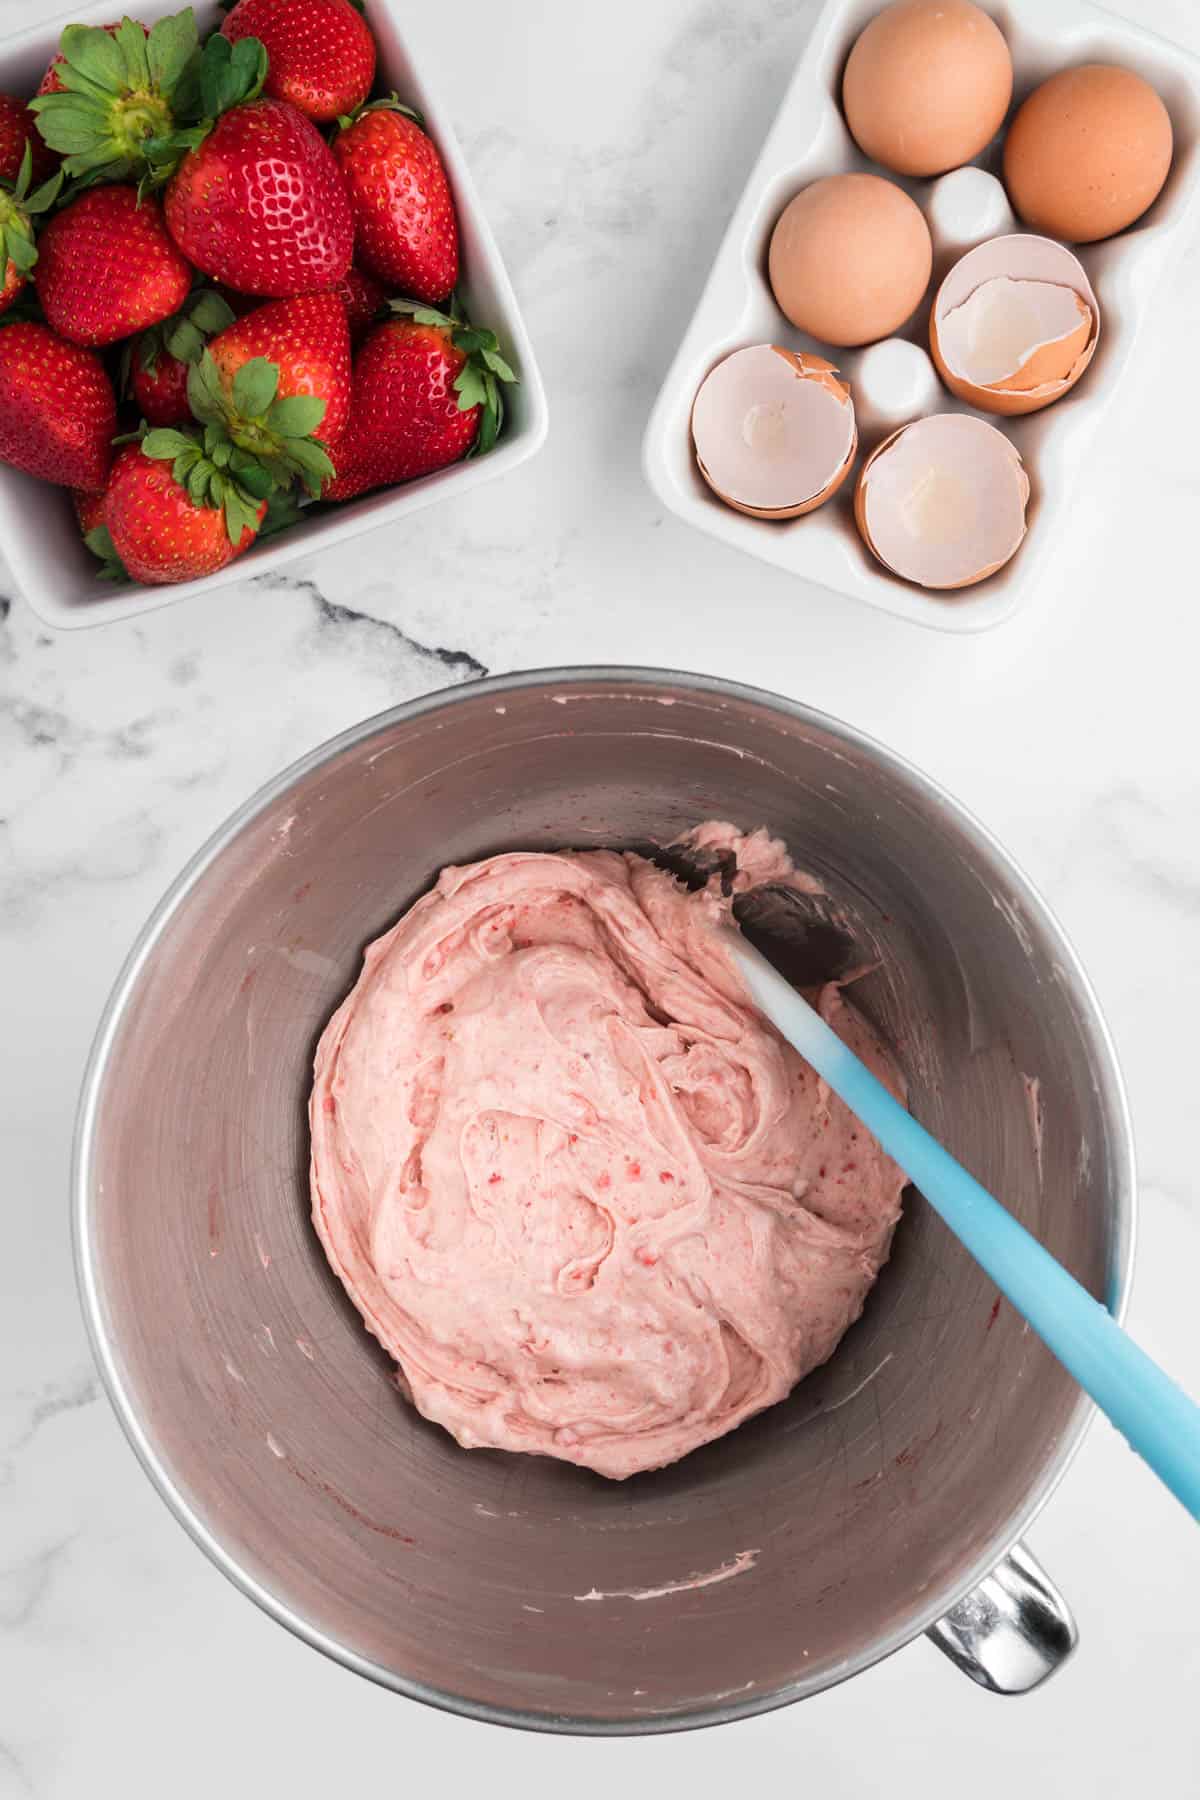 Strawberry cream cheese frosting in a stainless steel mixing bowl.